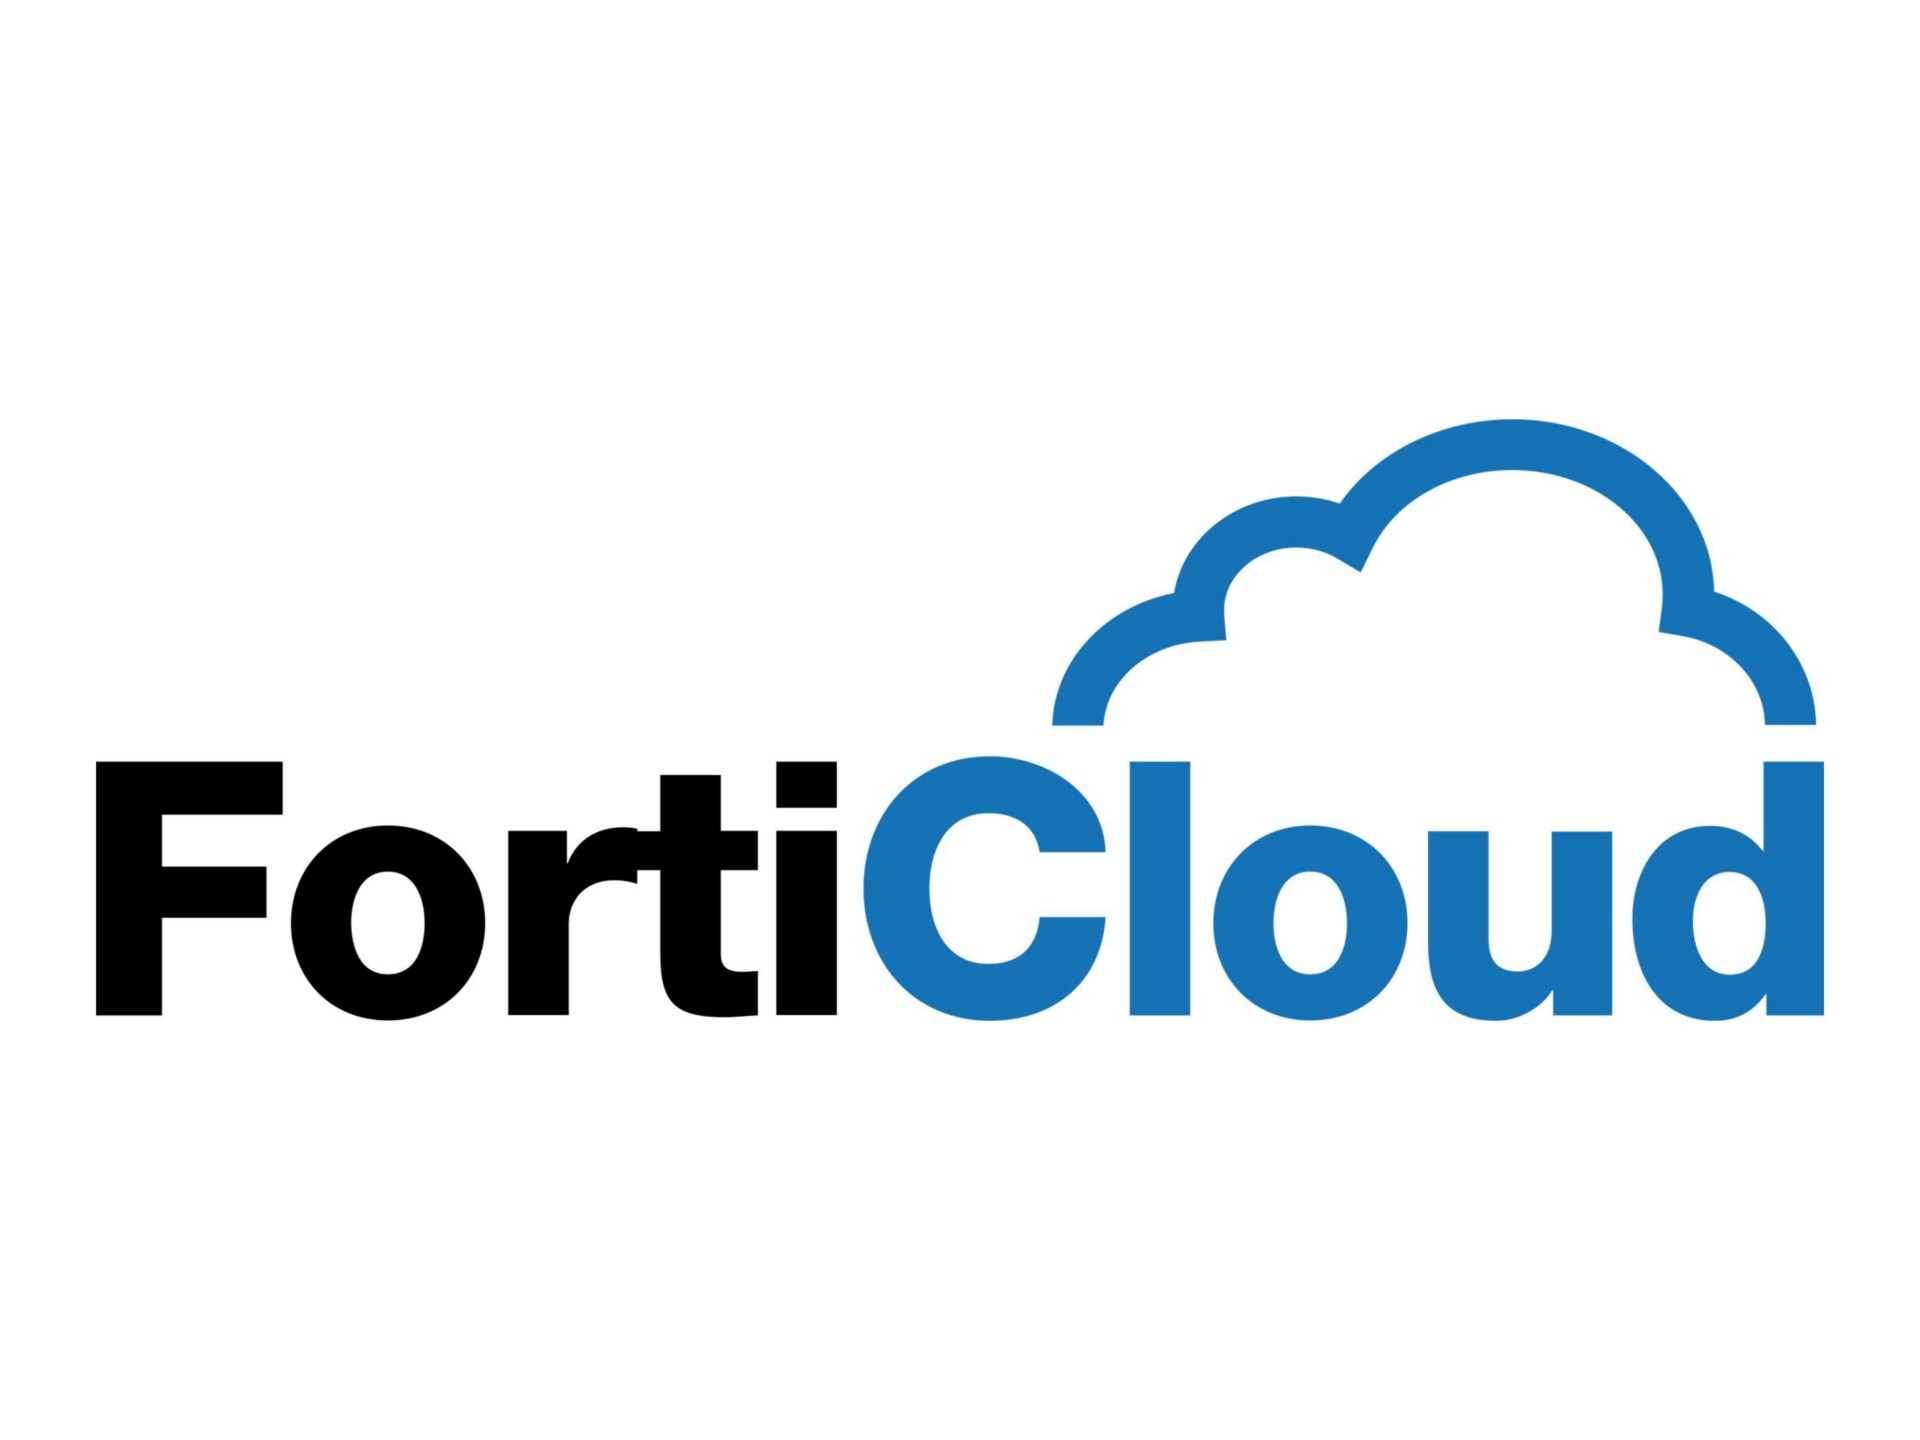 FortiToken Cloud - time-based subscription (3 years) + FortiCare 24x7 - up to 25 users, 2500 SMS messages